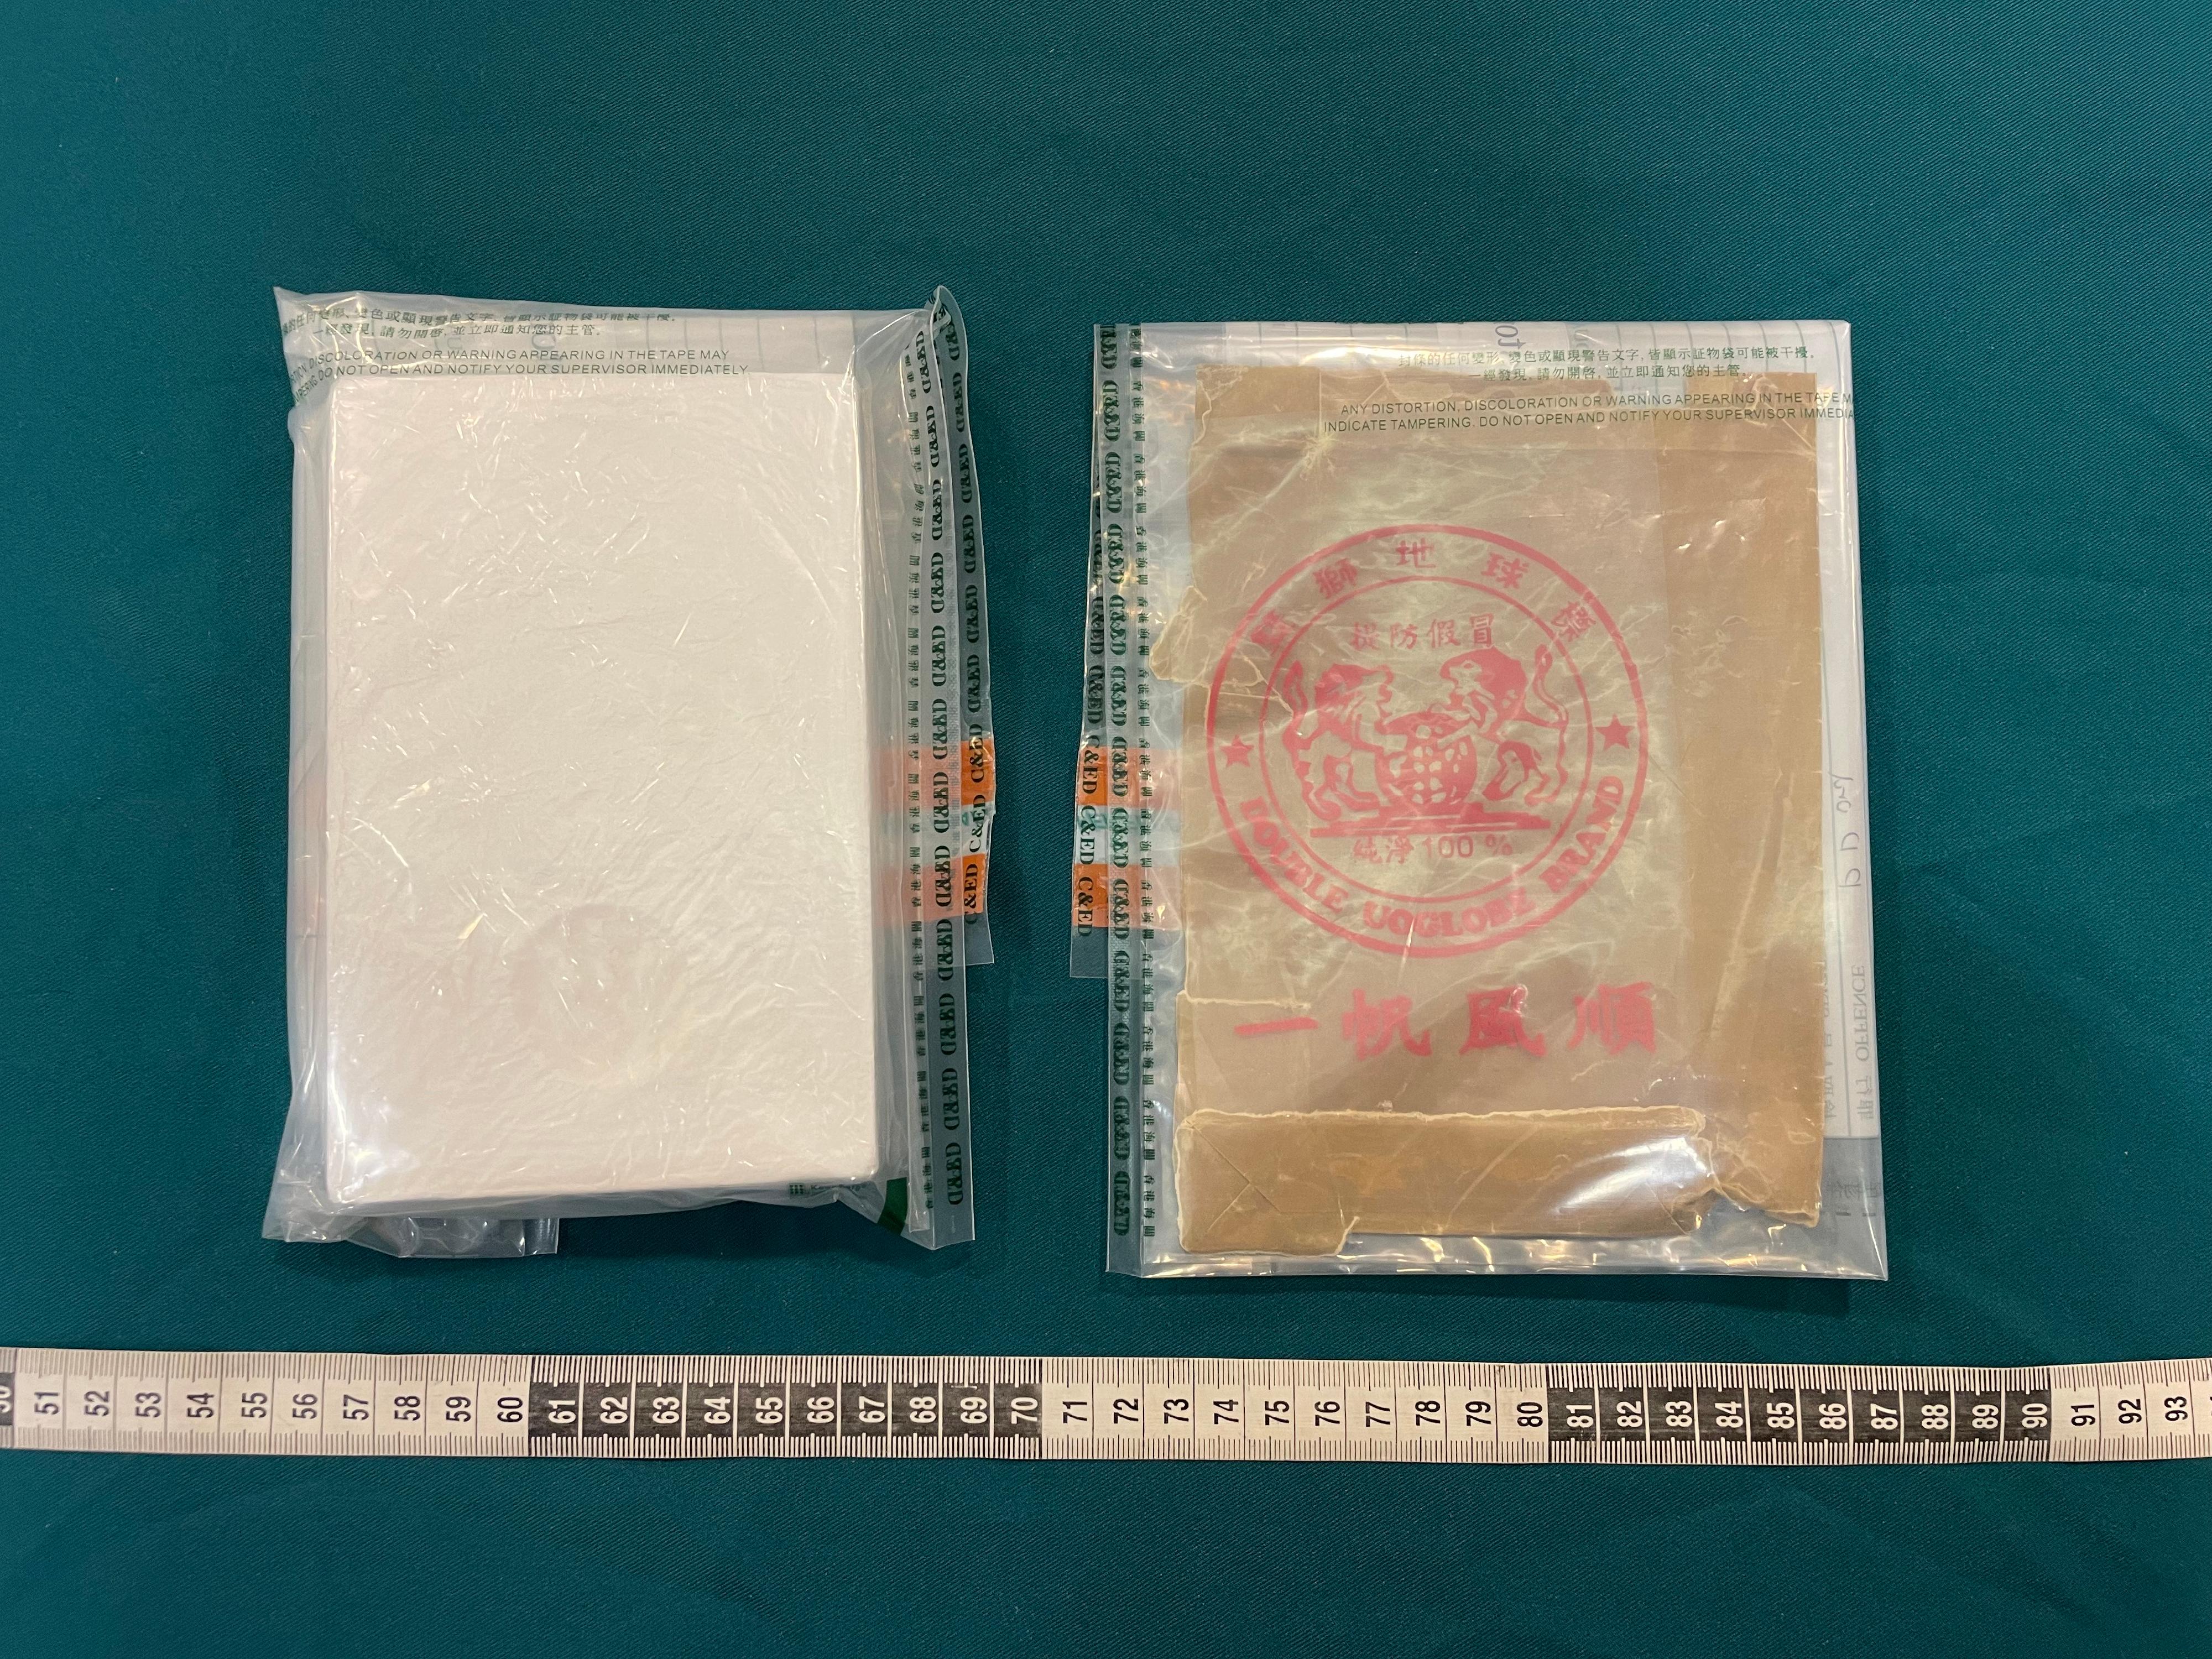 Hong Kong Customs on May 6 and May 16 seized about 200 kilograms of suspected ketamine and about 350 grams of suspected heroin at Hong Kong International Airport and in Sham Shui Po respectively. The total estimated market value was over $86 million. Photo shows the suspected heroin seized.